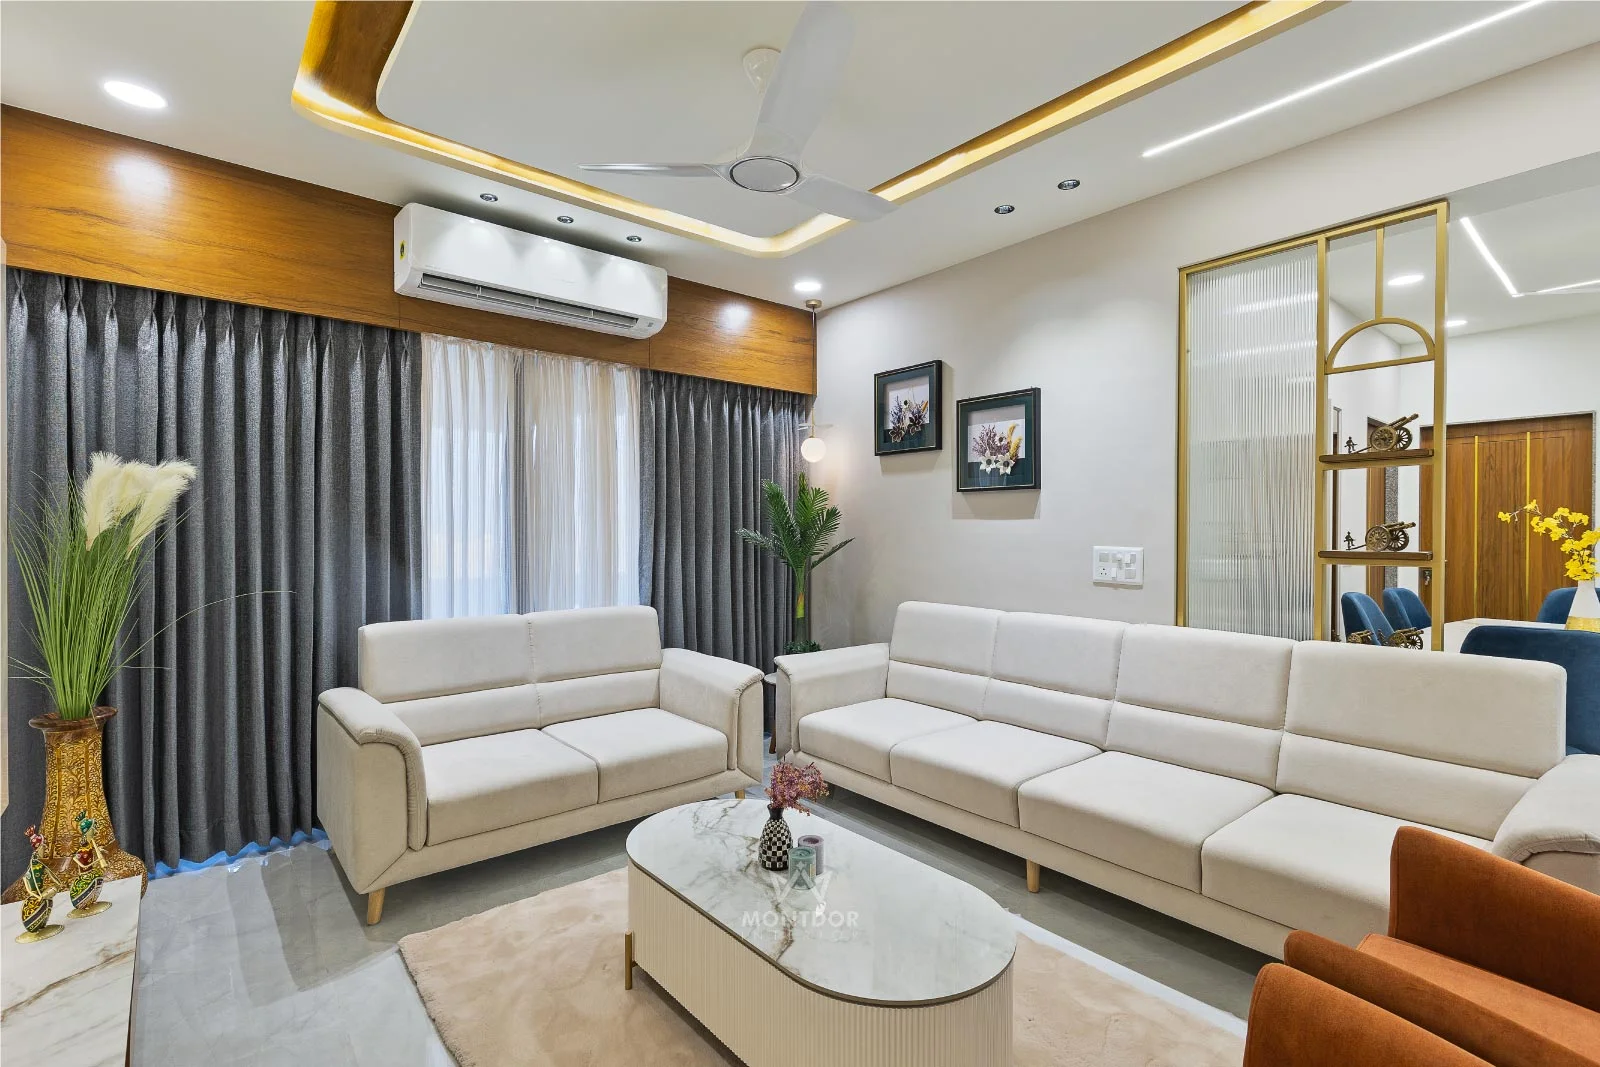 Why PVC Ceiling Designs are a Cost-Effective Choice for Your Living Room?